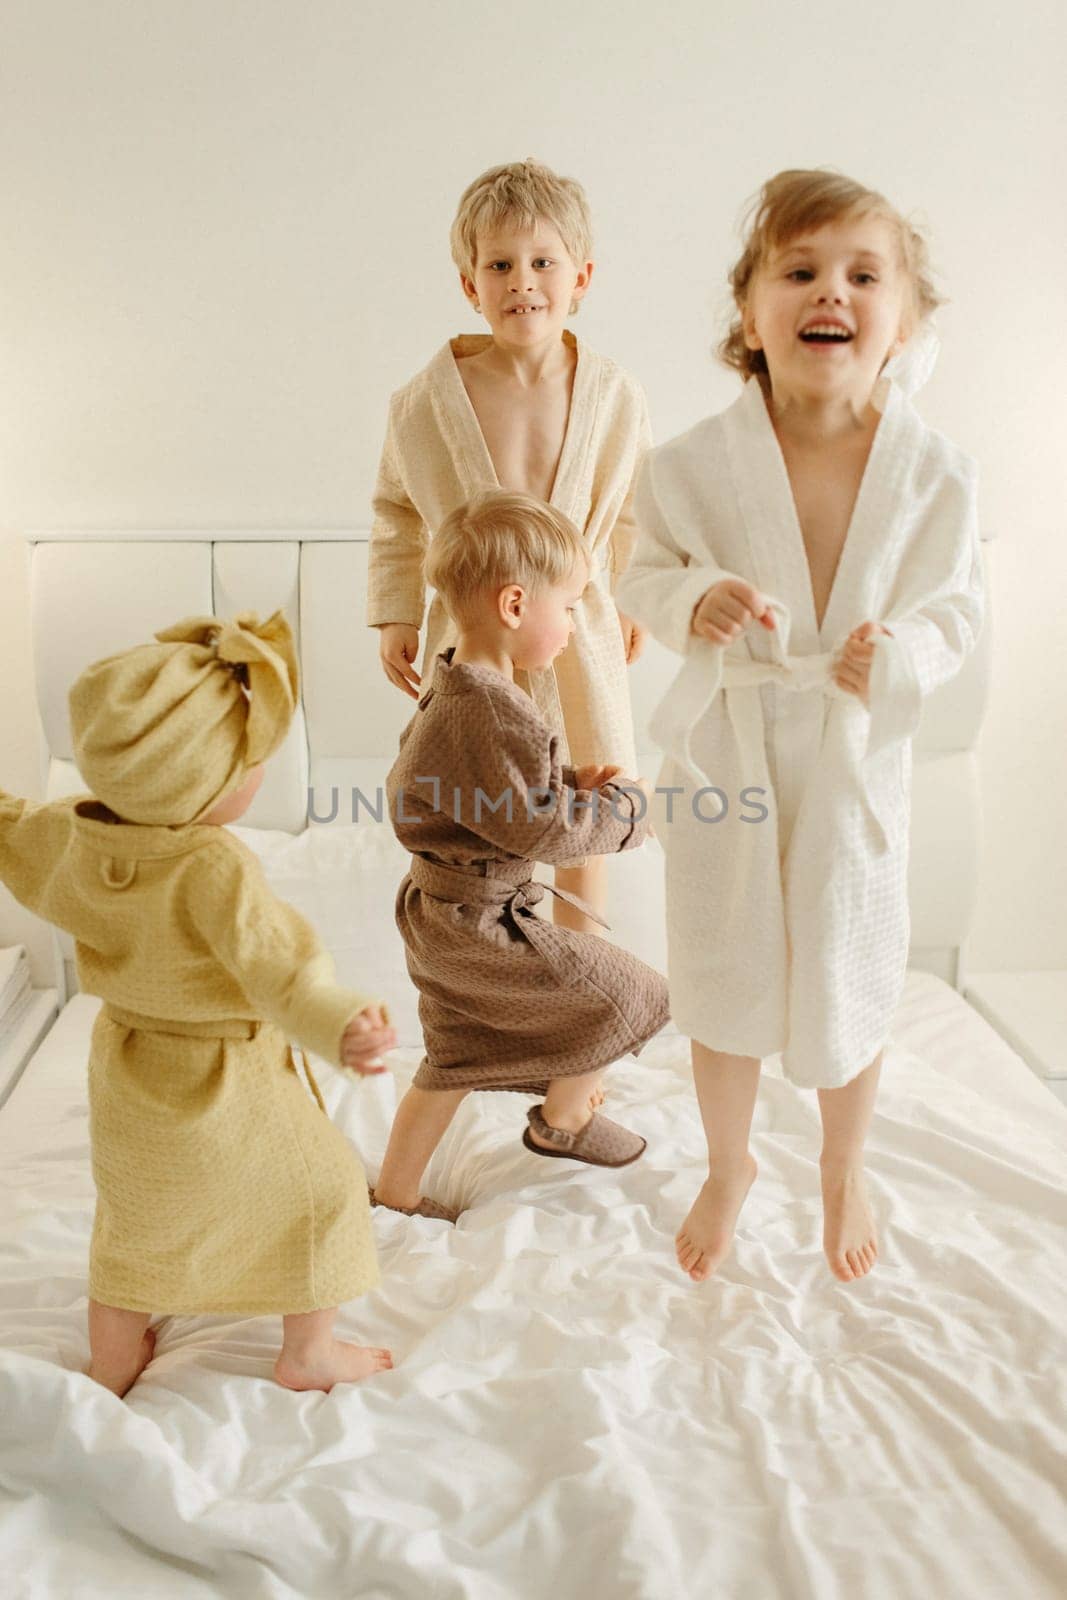 Joyful children in bathrobes play on the bed - they jump by Sd28DimoN_1976